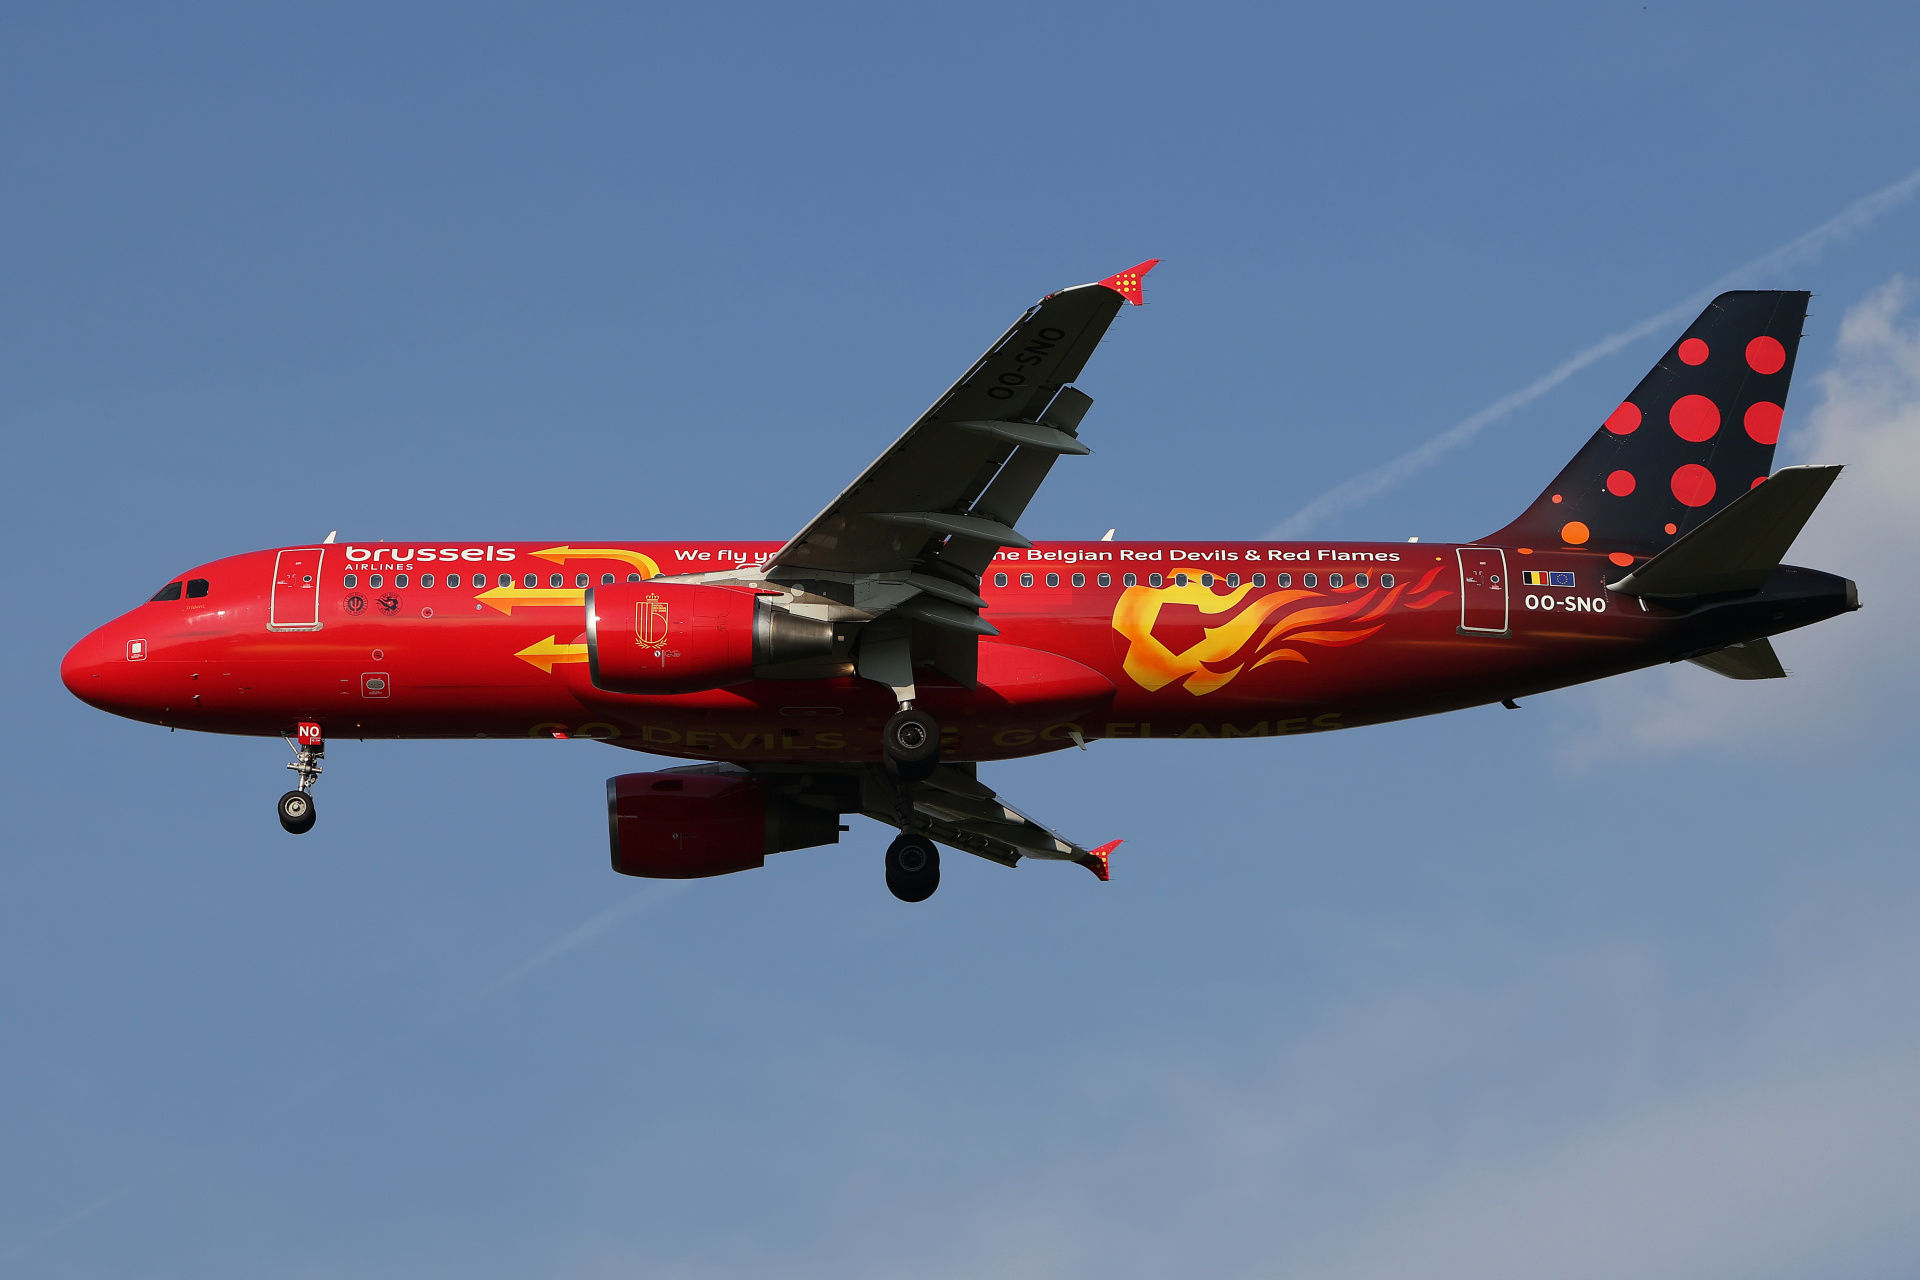 OO-SNO (Belgian Icons - Trident: Red Devils & Red Flames livery) (Aircraft » EPWA Spotting » Airbus A320-200 » Brussels Airlines)